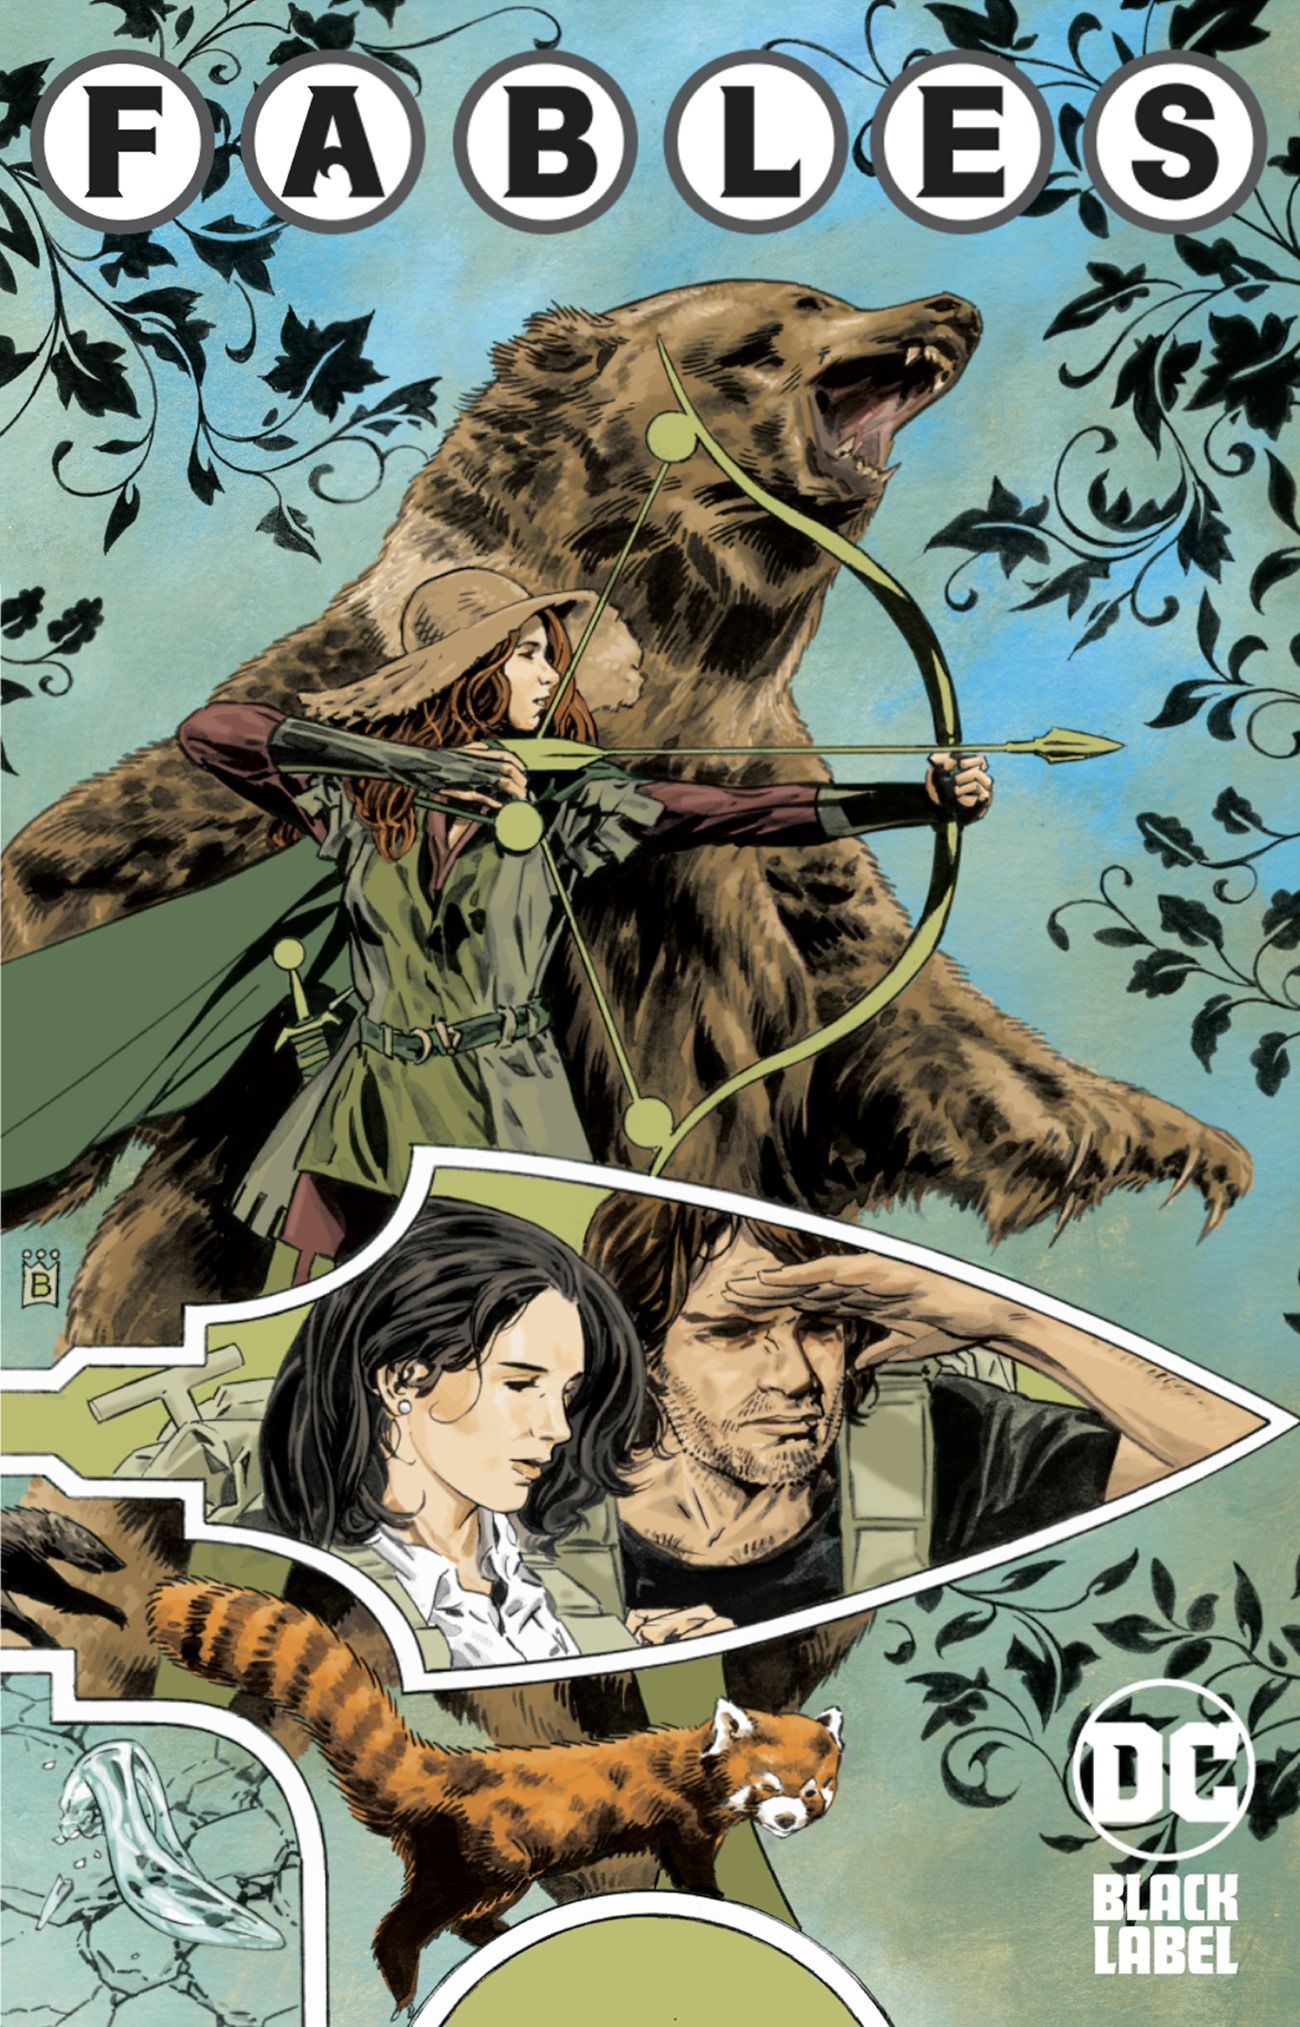 Exclusive FABLES Creator Bill Willingham Talks The Return & Future of The Series